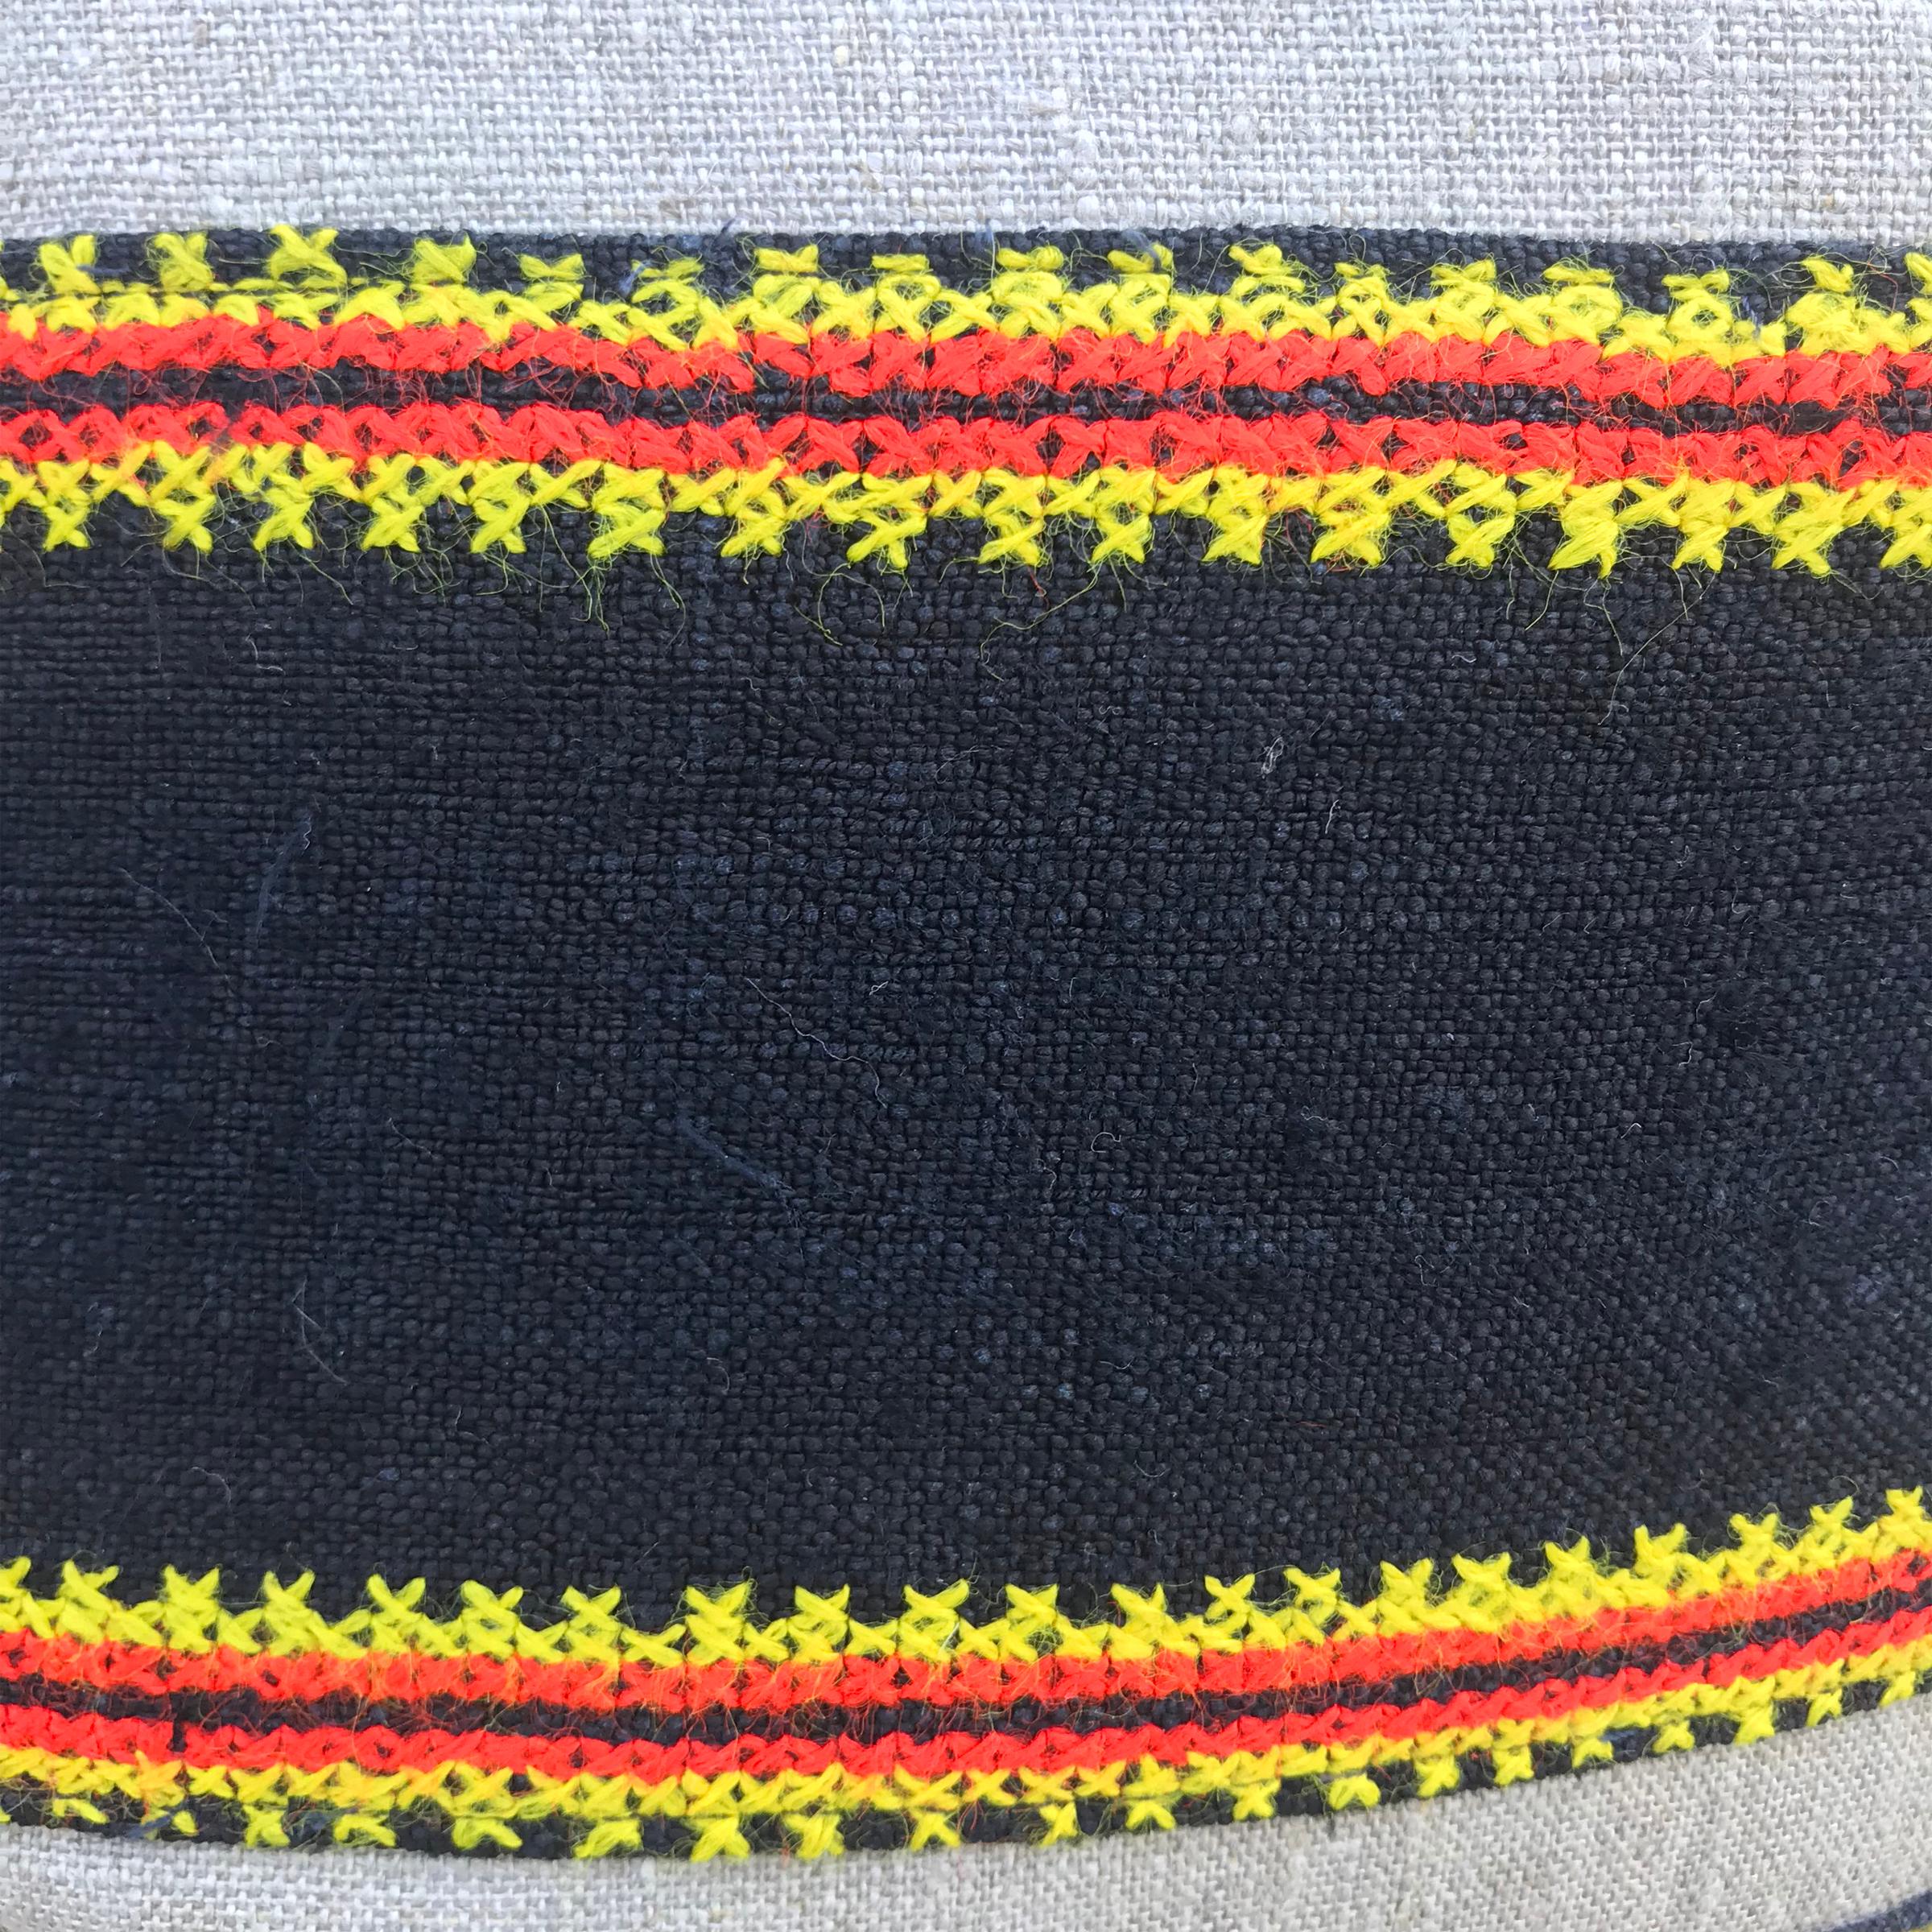 Vegetable Dyed Pair of Vintage Hmong Embroidery Pillows